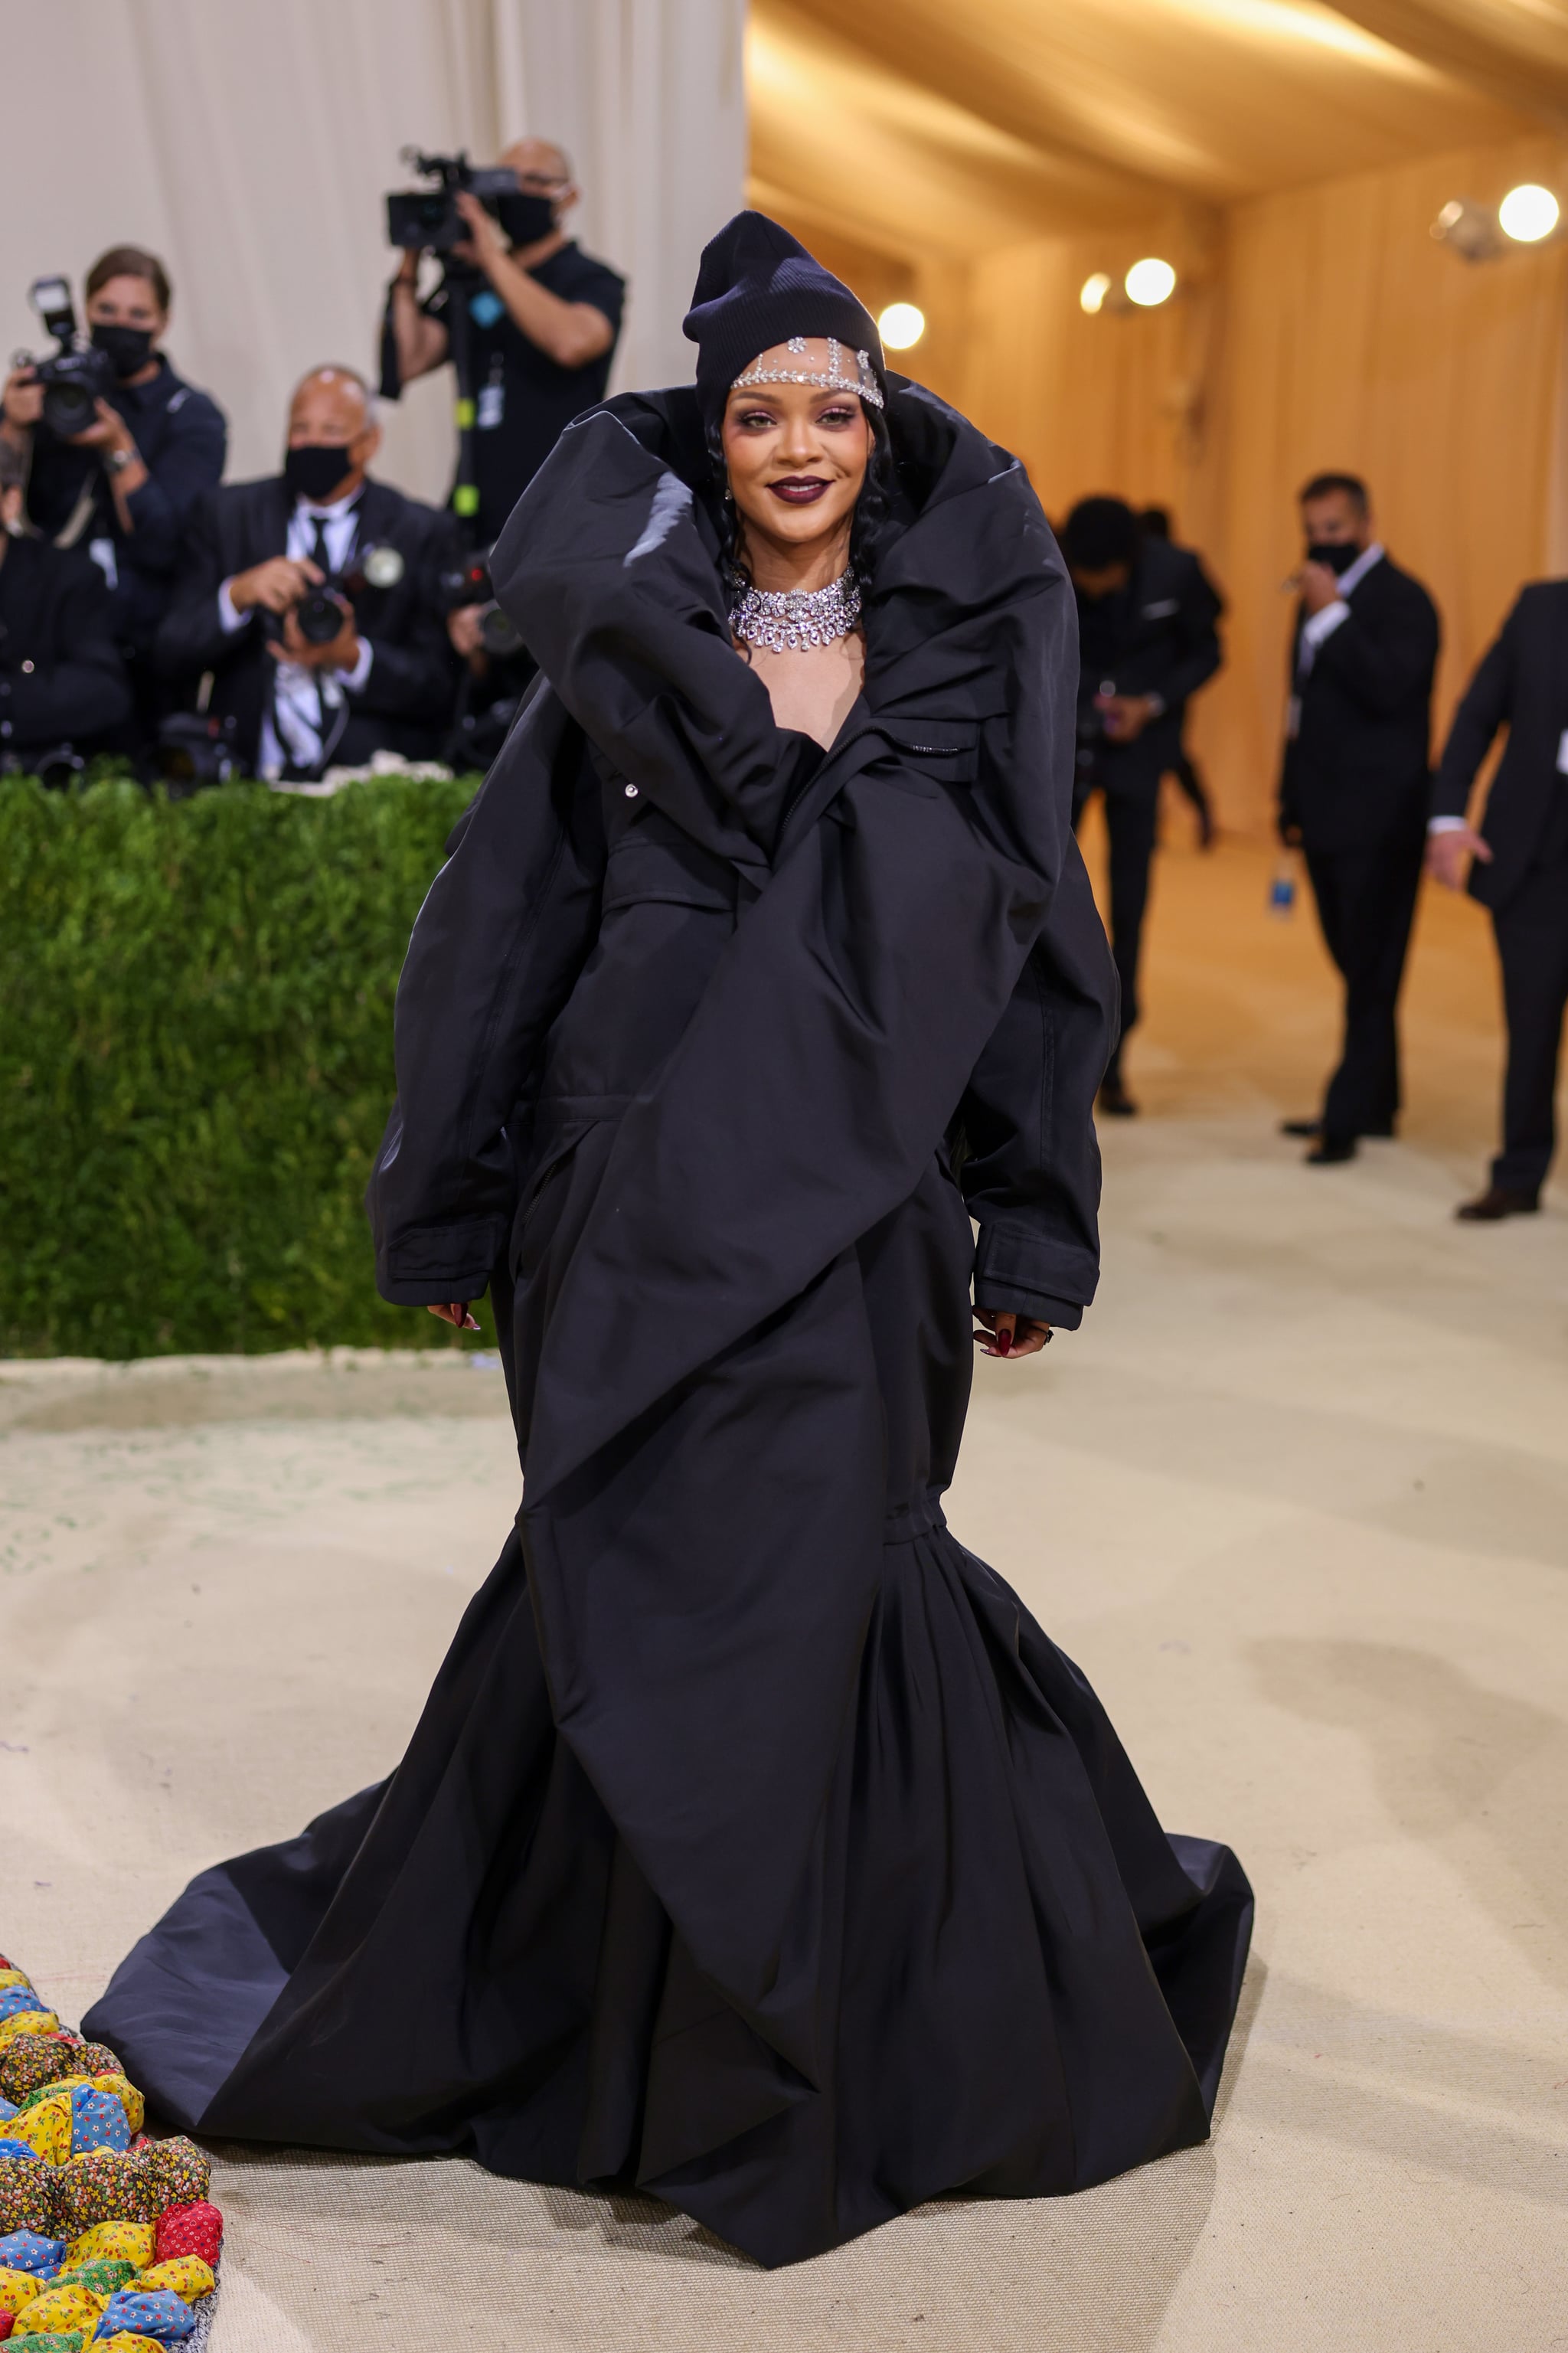 What Is The Met Gala And Why Do People Care So Much?